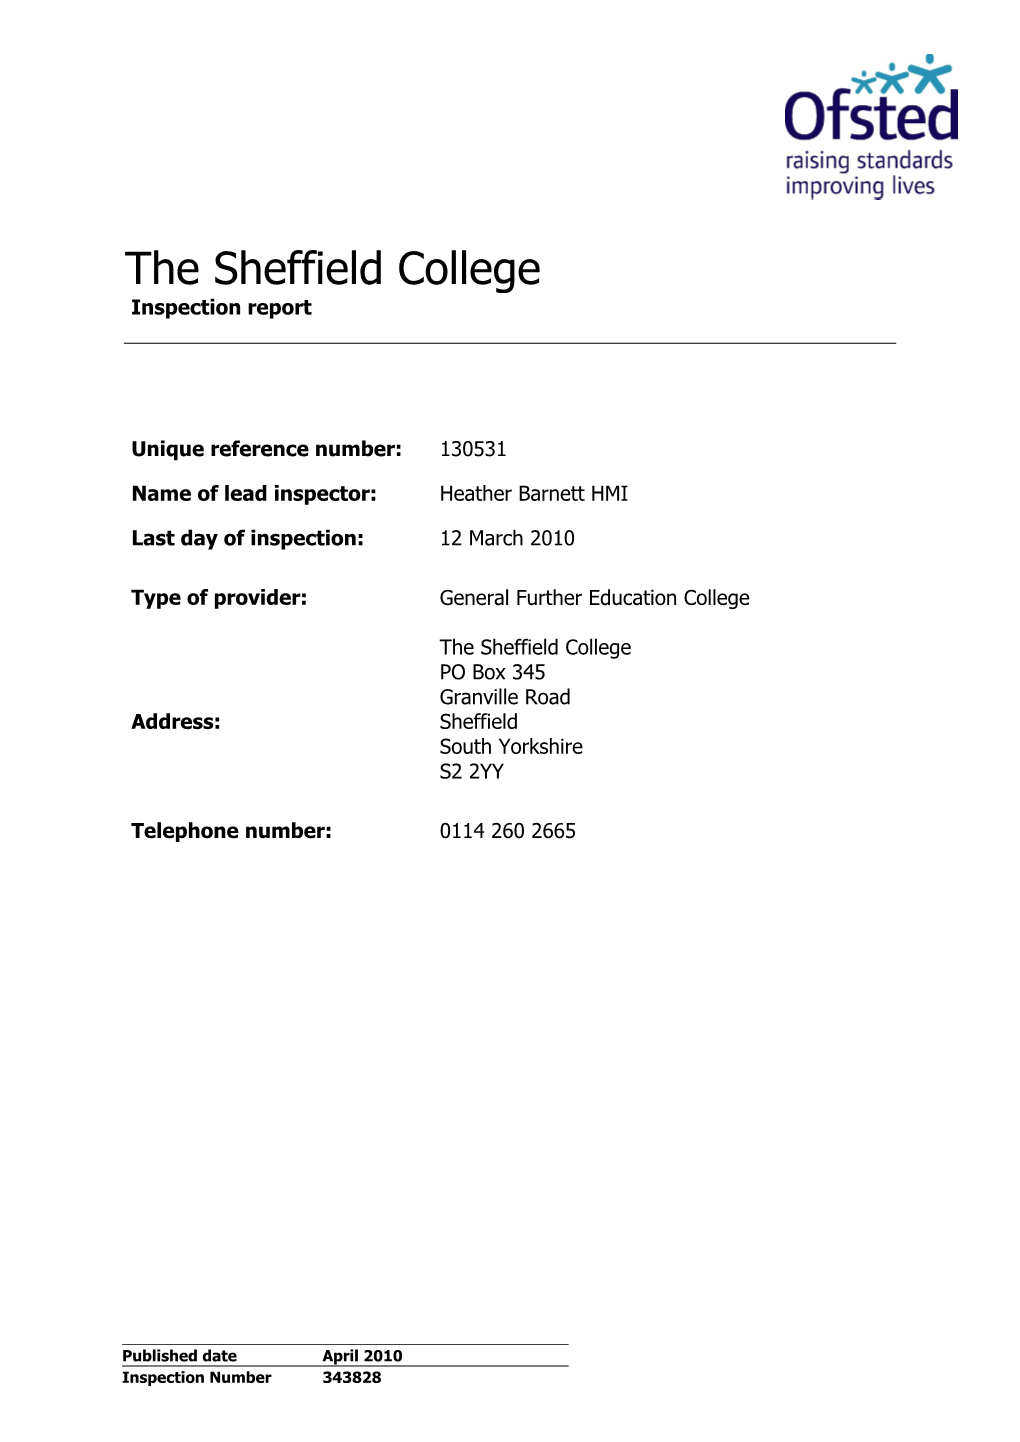 The Sheffield College Inspection Report